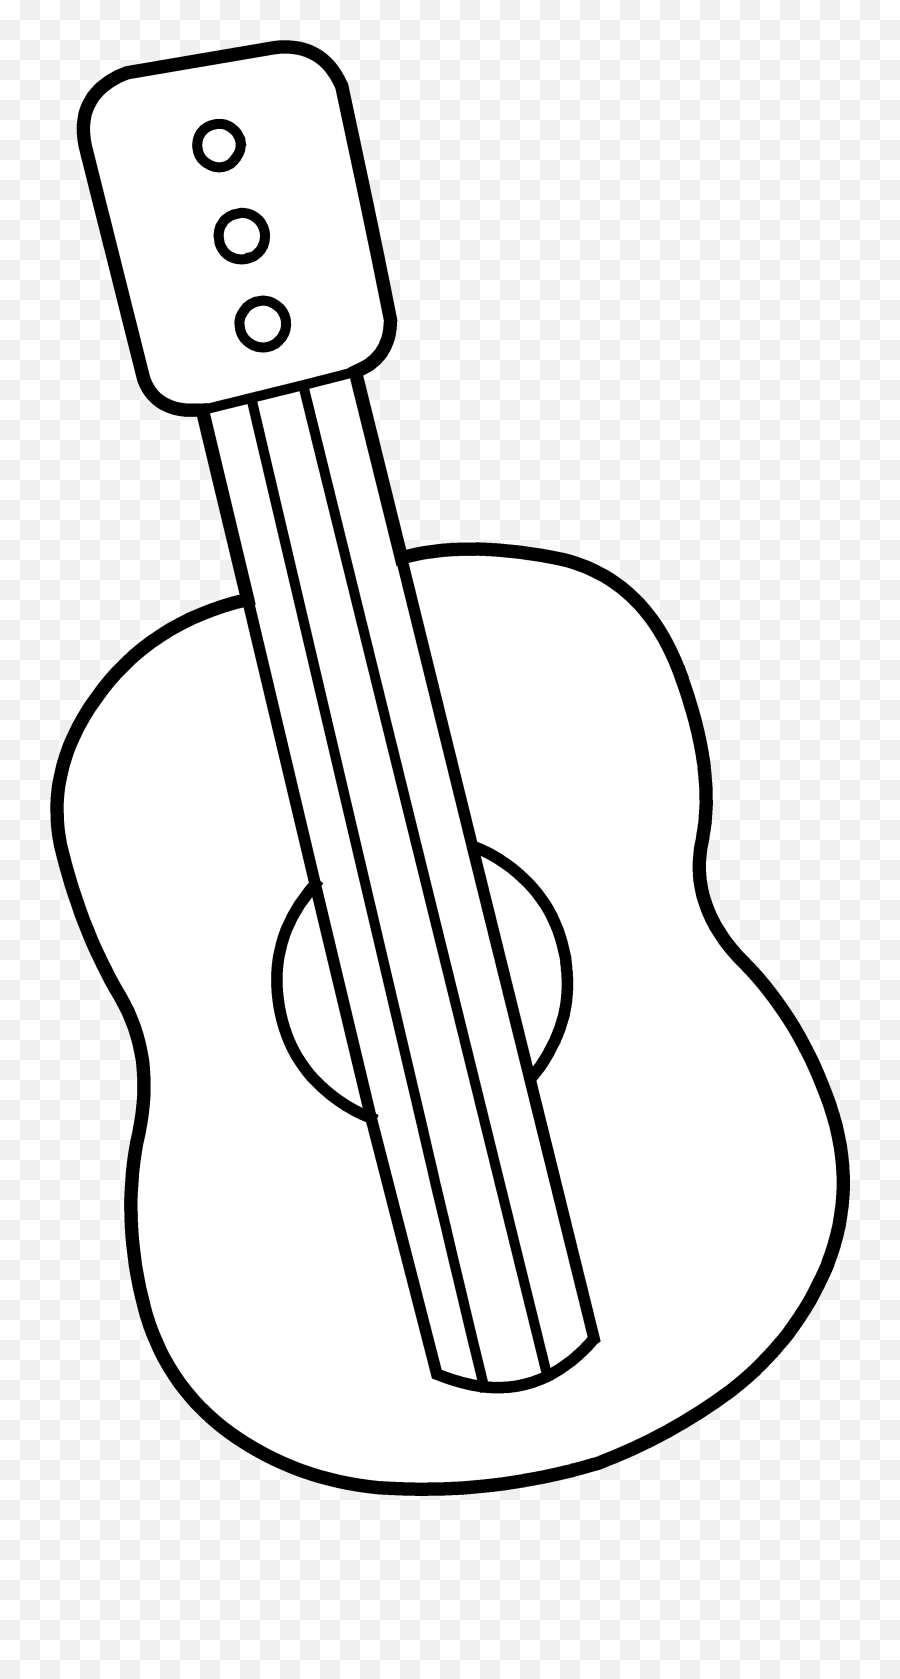 Free Pictures Guitar Download Free Clip Art Free Clip Art - Clip Art Emoji,Guitar Clipart